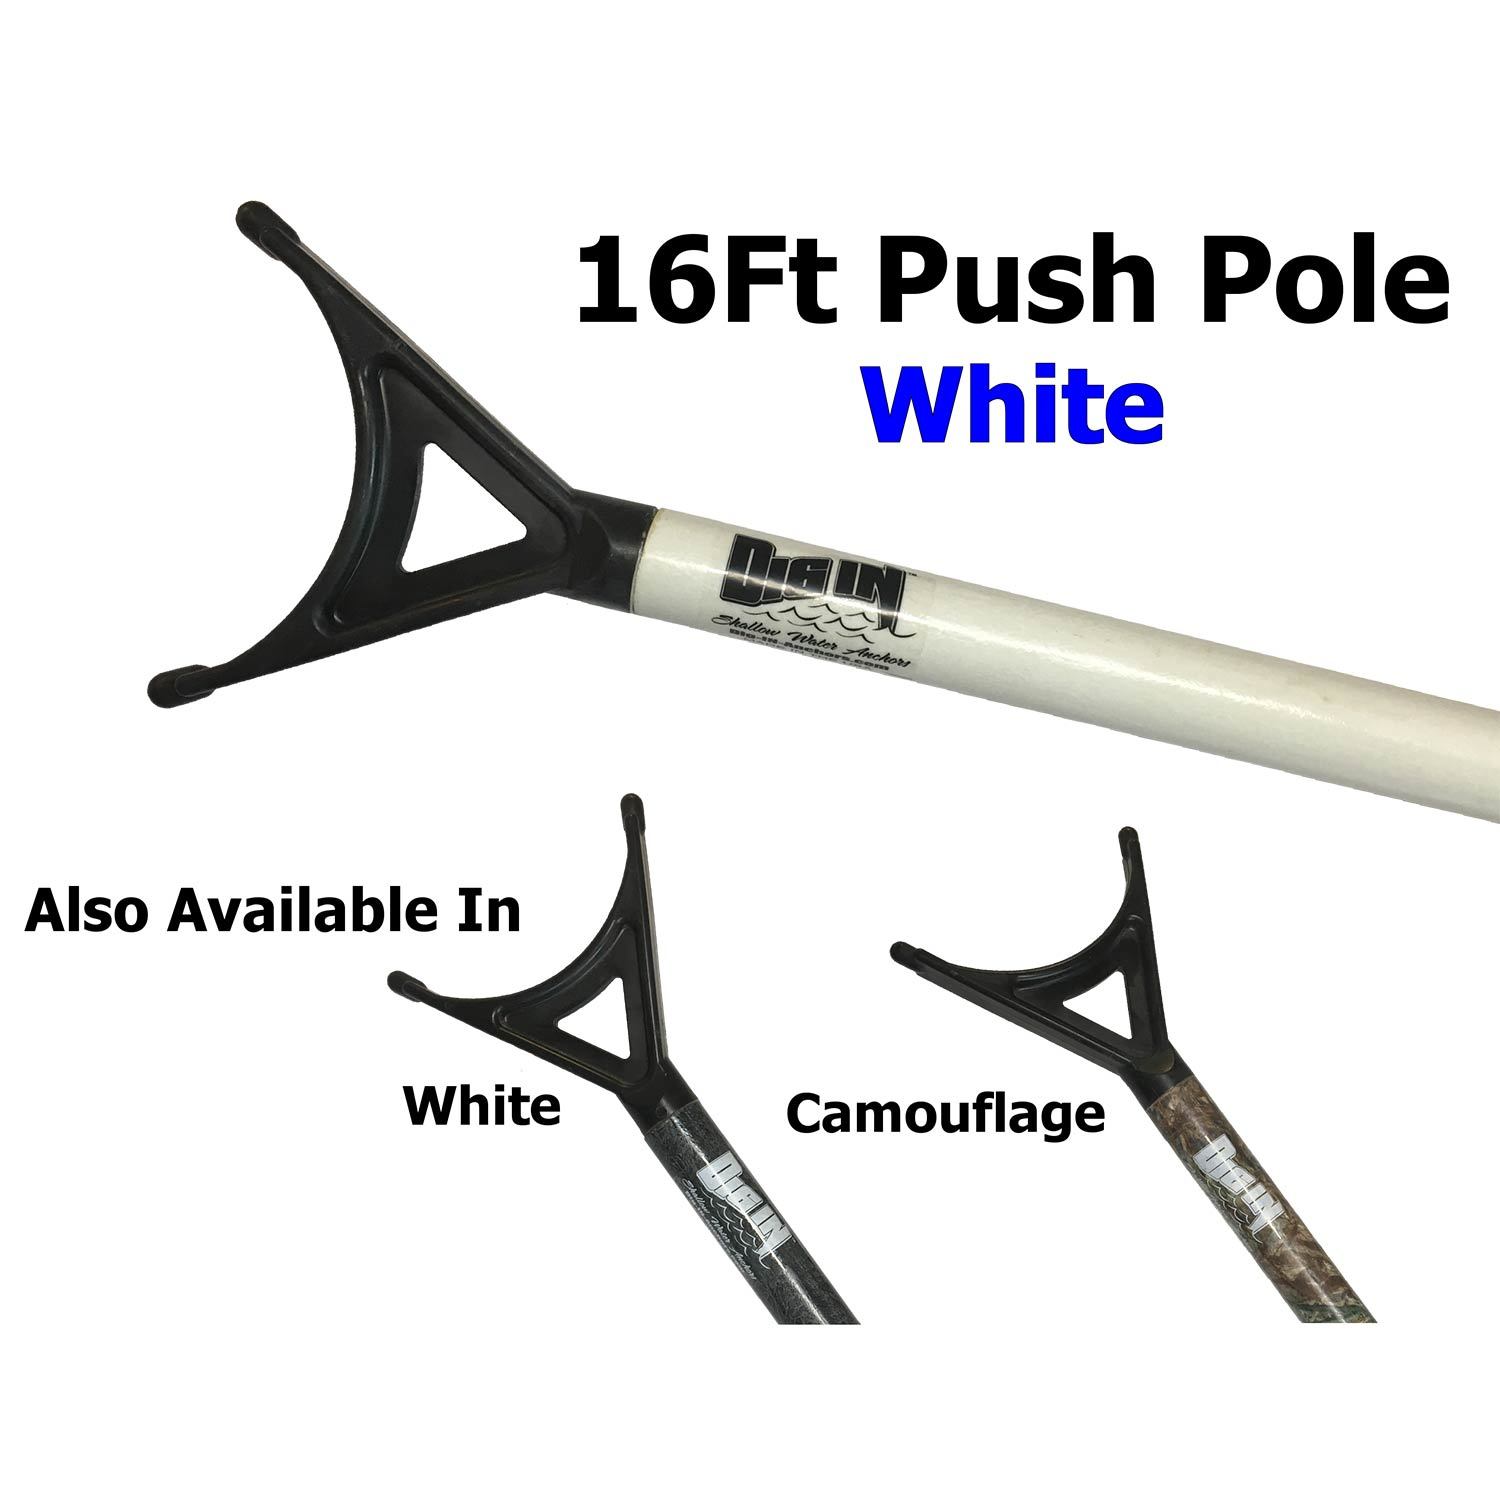 DIG IN ANCHORS 16' Fiberglass Push Pole with Extra Tough Anchoring